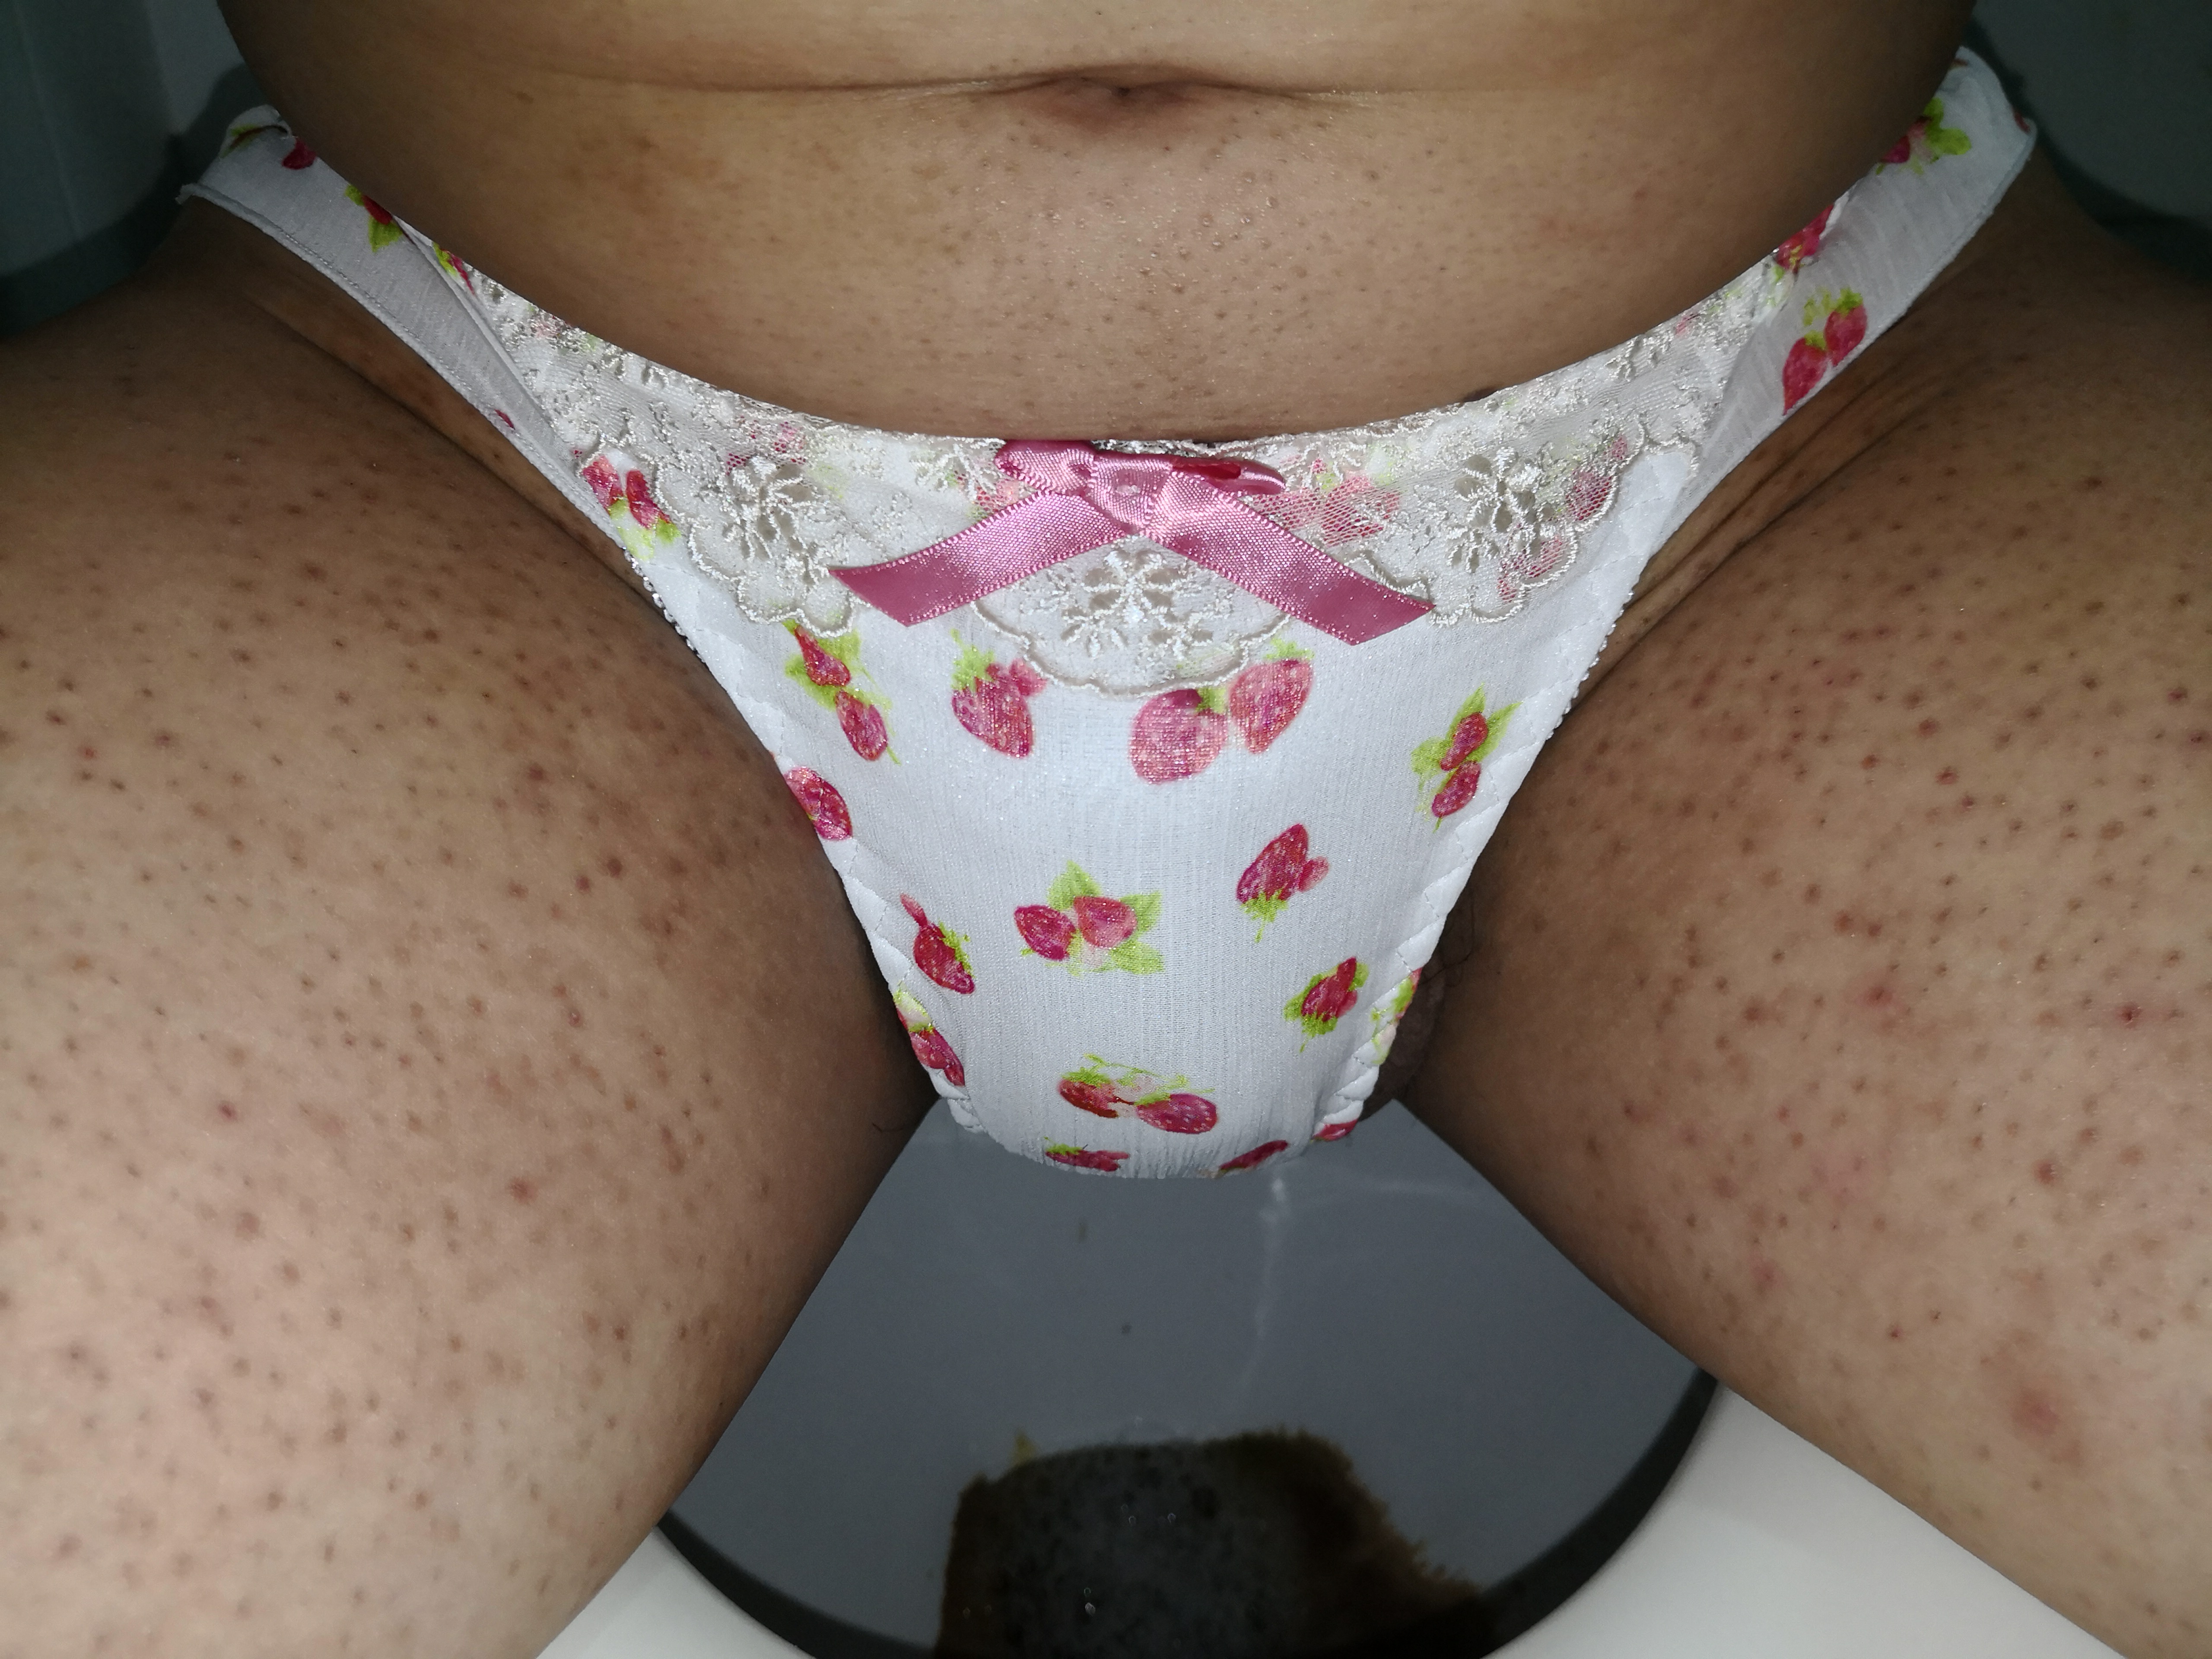 It time to play that lovely Strawberry pattern white panty!